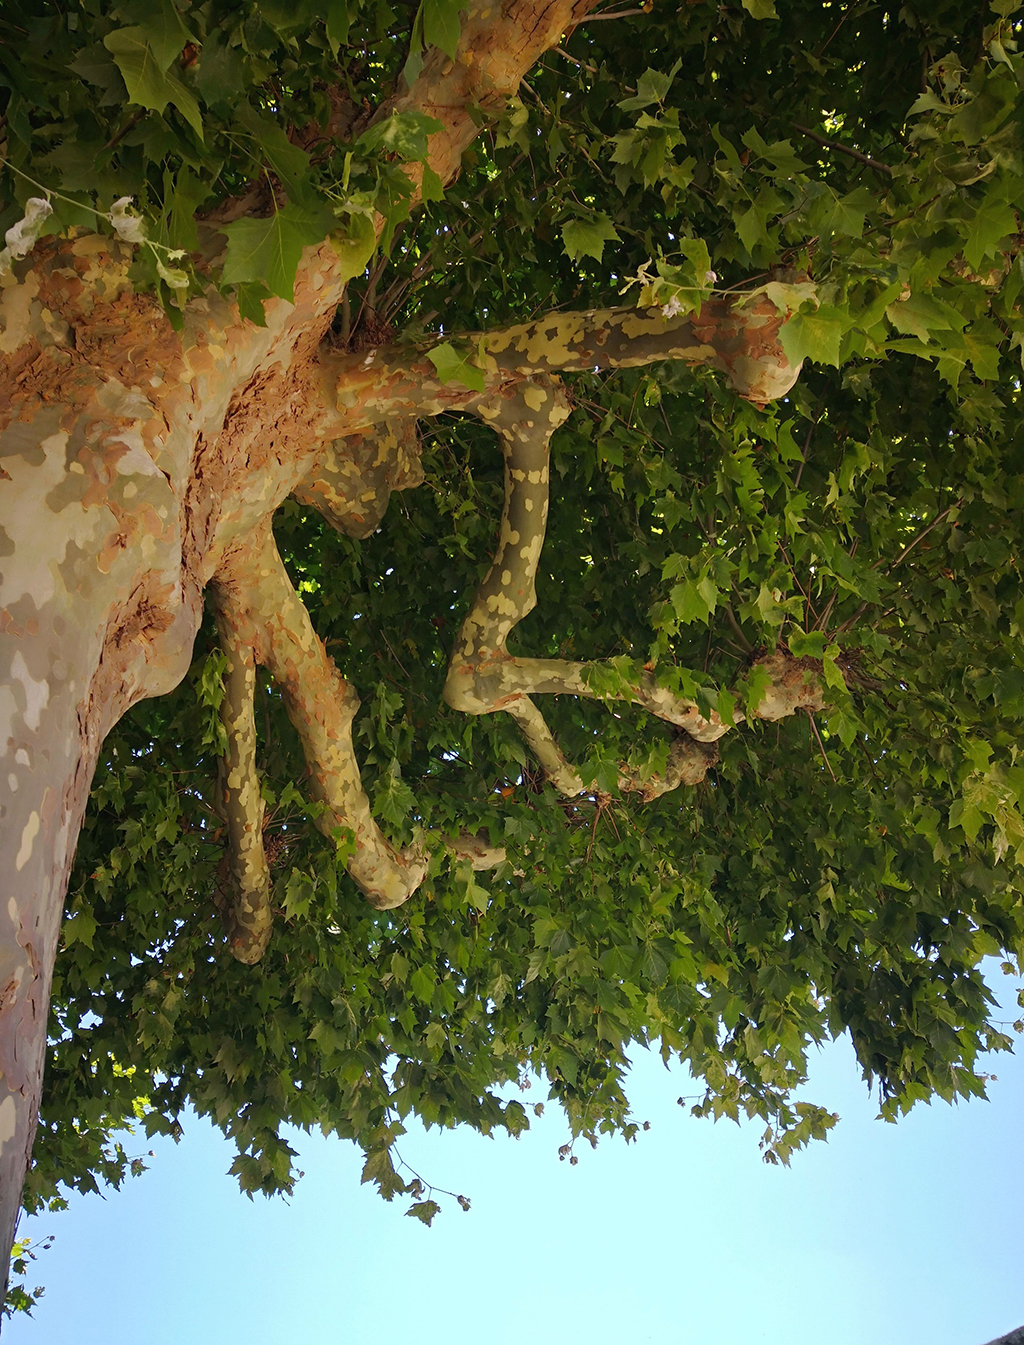 A-Guide-To-The-American-Sycamore-And-Tree-Trimming-Service-_-Dallas-Fort-Worth-Area